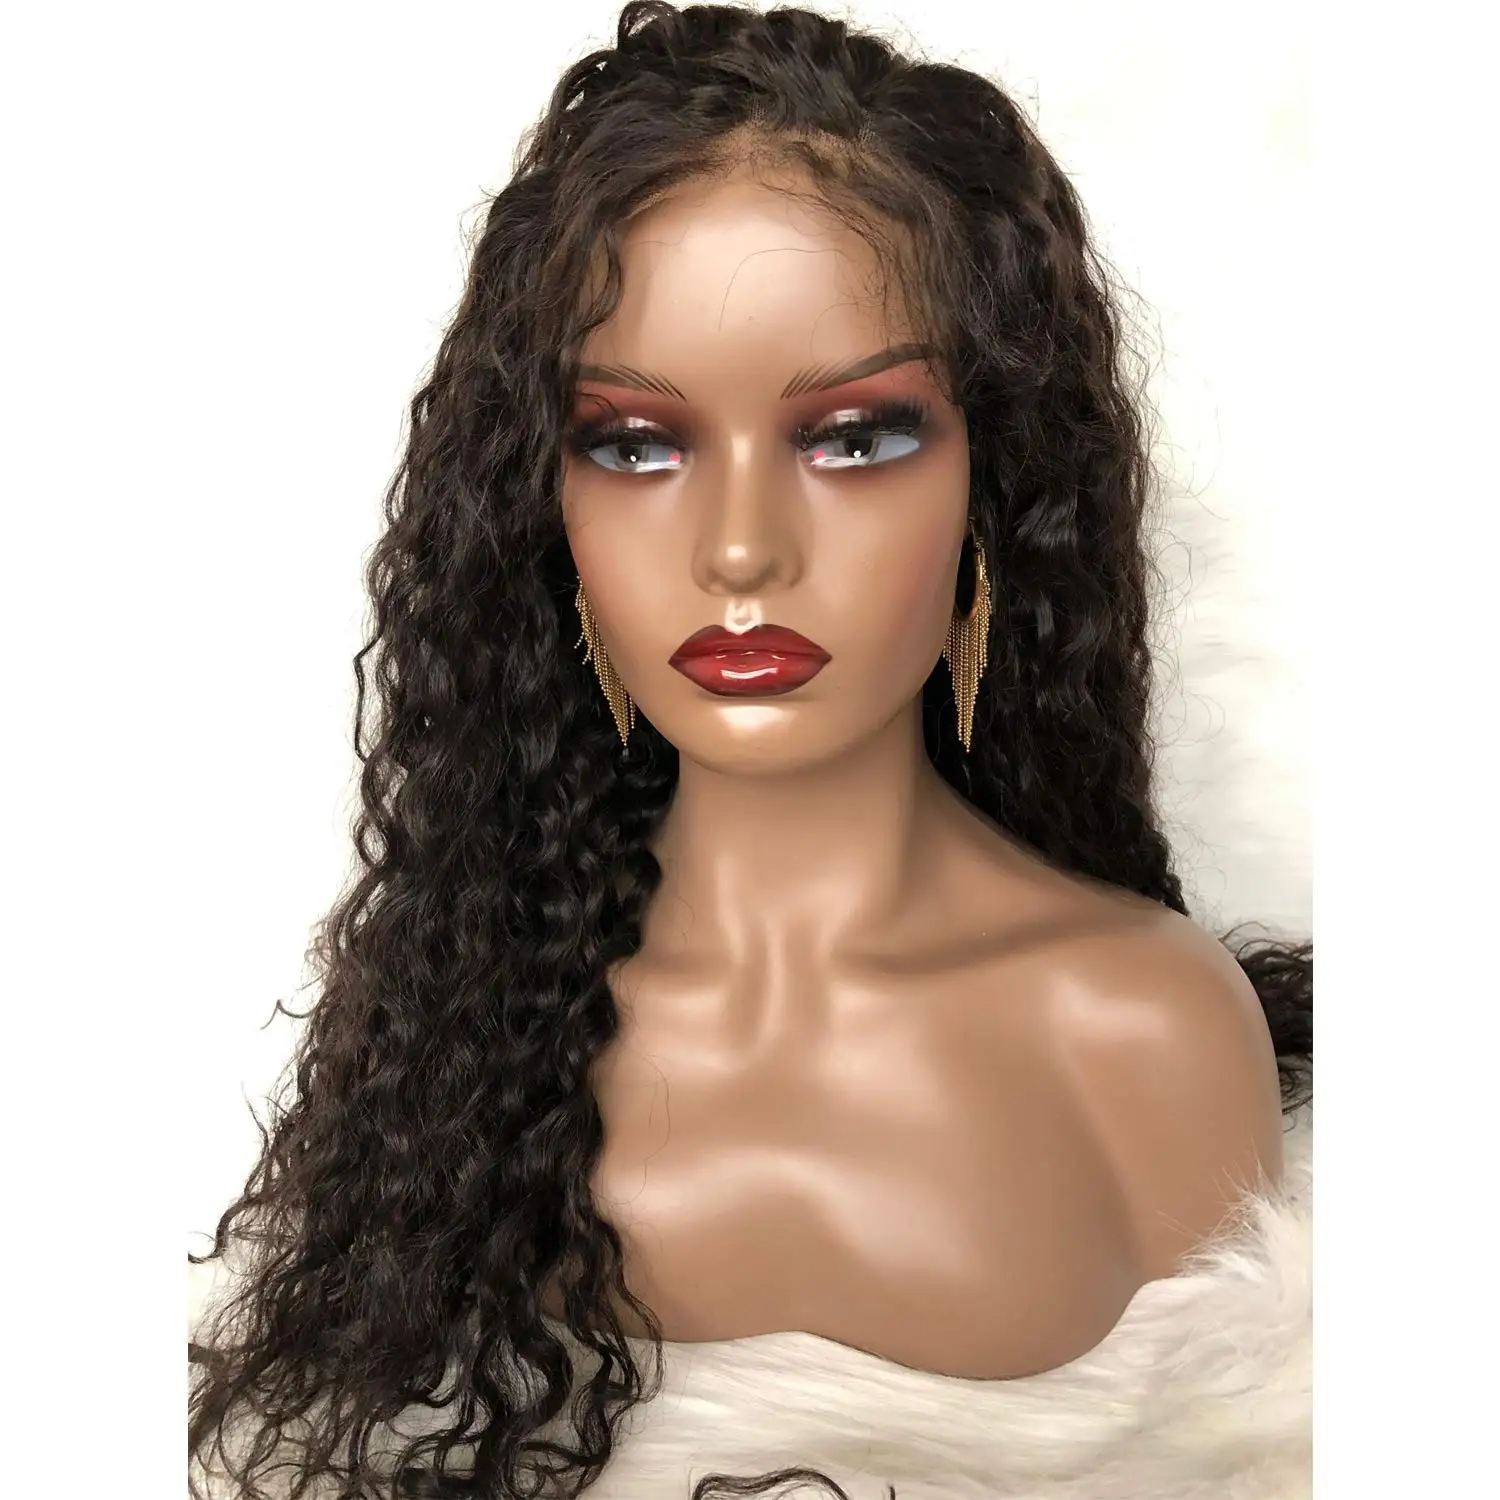 Realistic Female Mannequin Head Model with Shoulder Manikin PVC Head Bust Wig Head Stand for Wigs Display Making,Styling,